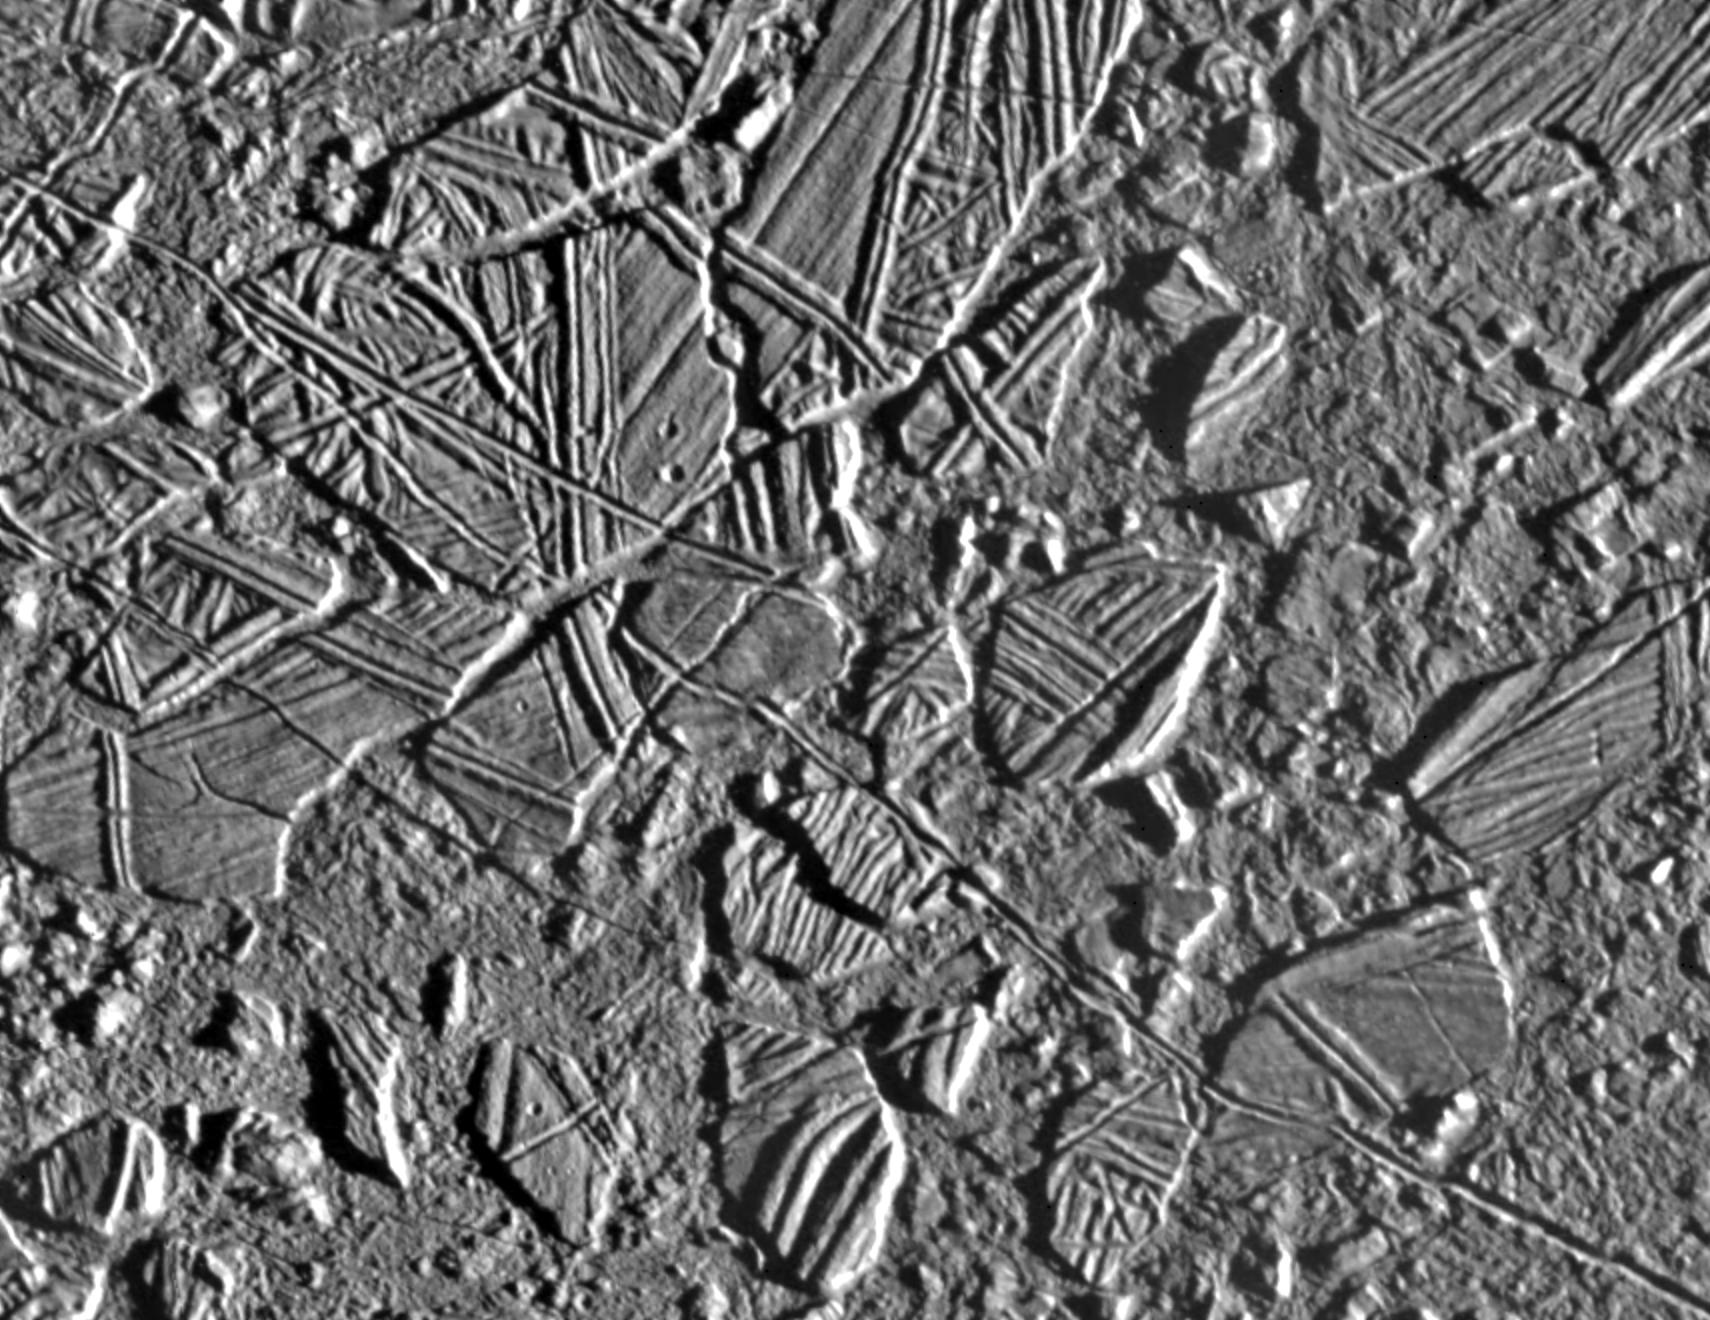 black and white view of rough terrain on an icy surface